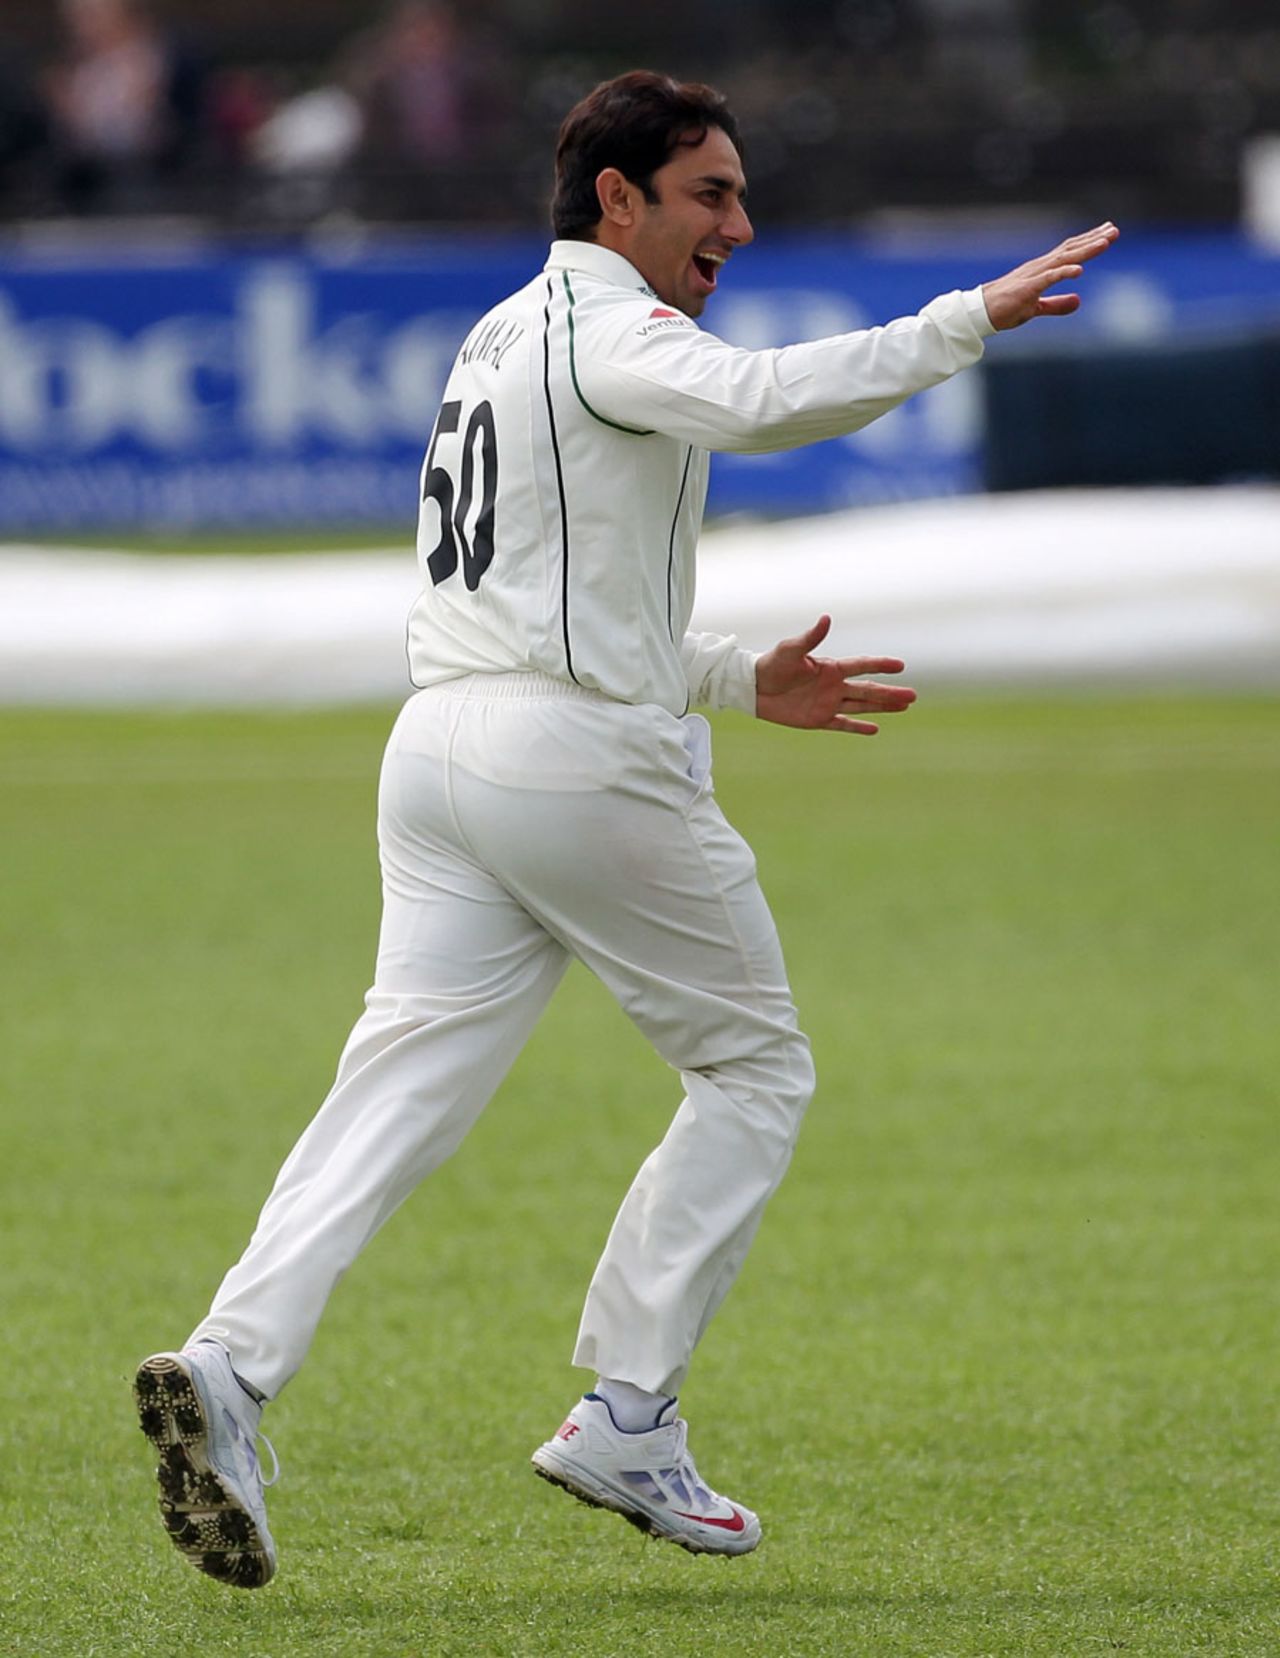 Saeed Ajmal took two wickets in two balls in his first game since arriving, Worcestershire v Derbyshire, County Championship, Division Two, New Road, April 28, 2014